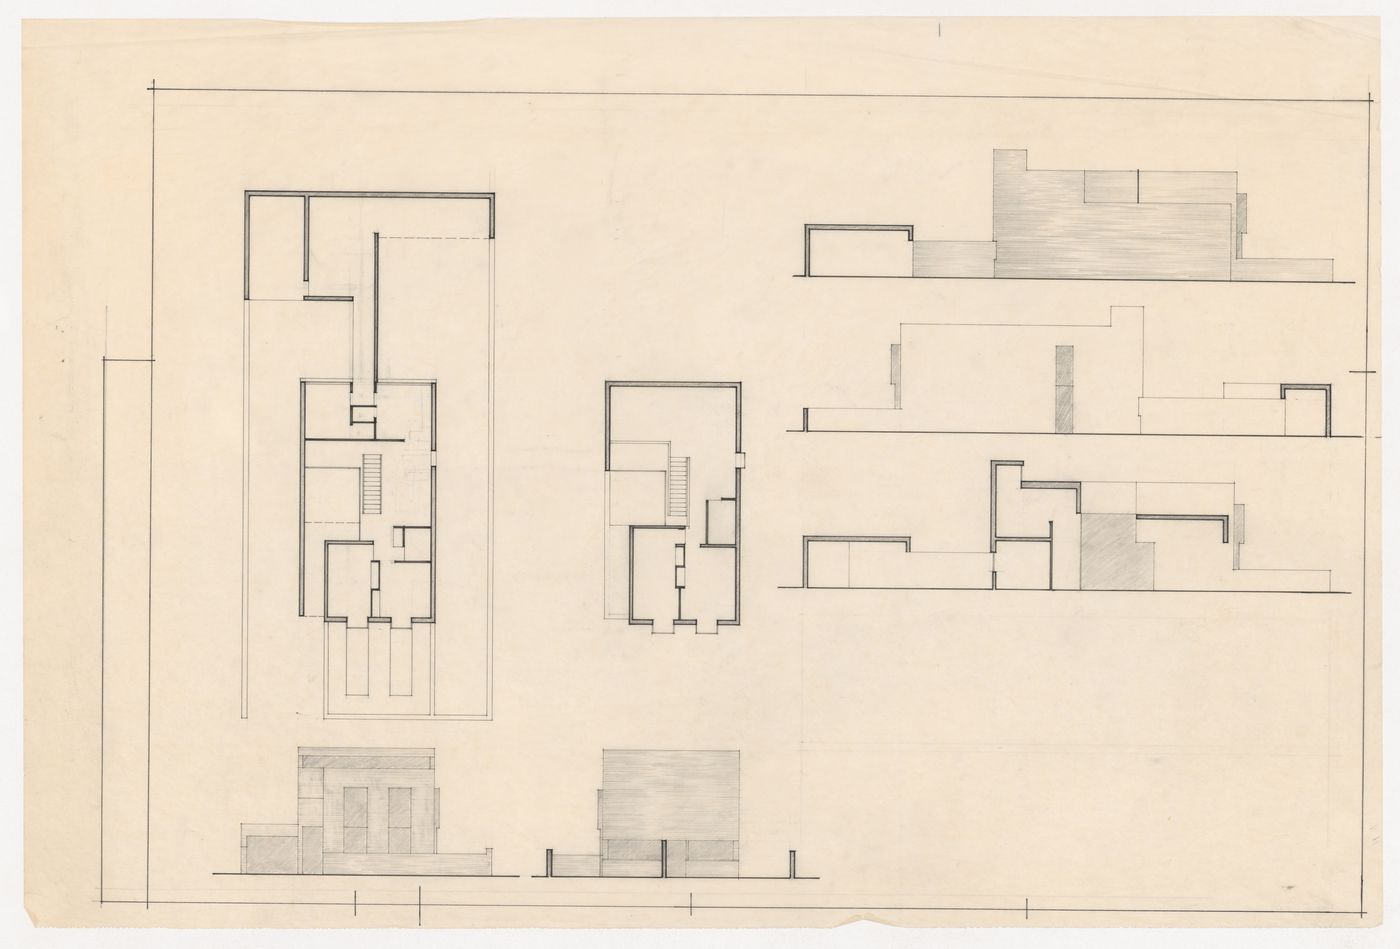 Plans, elevations and sections for Casa Manuel Magalhães, Porto